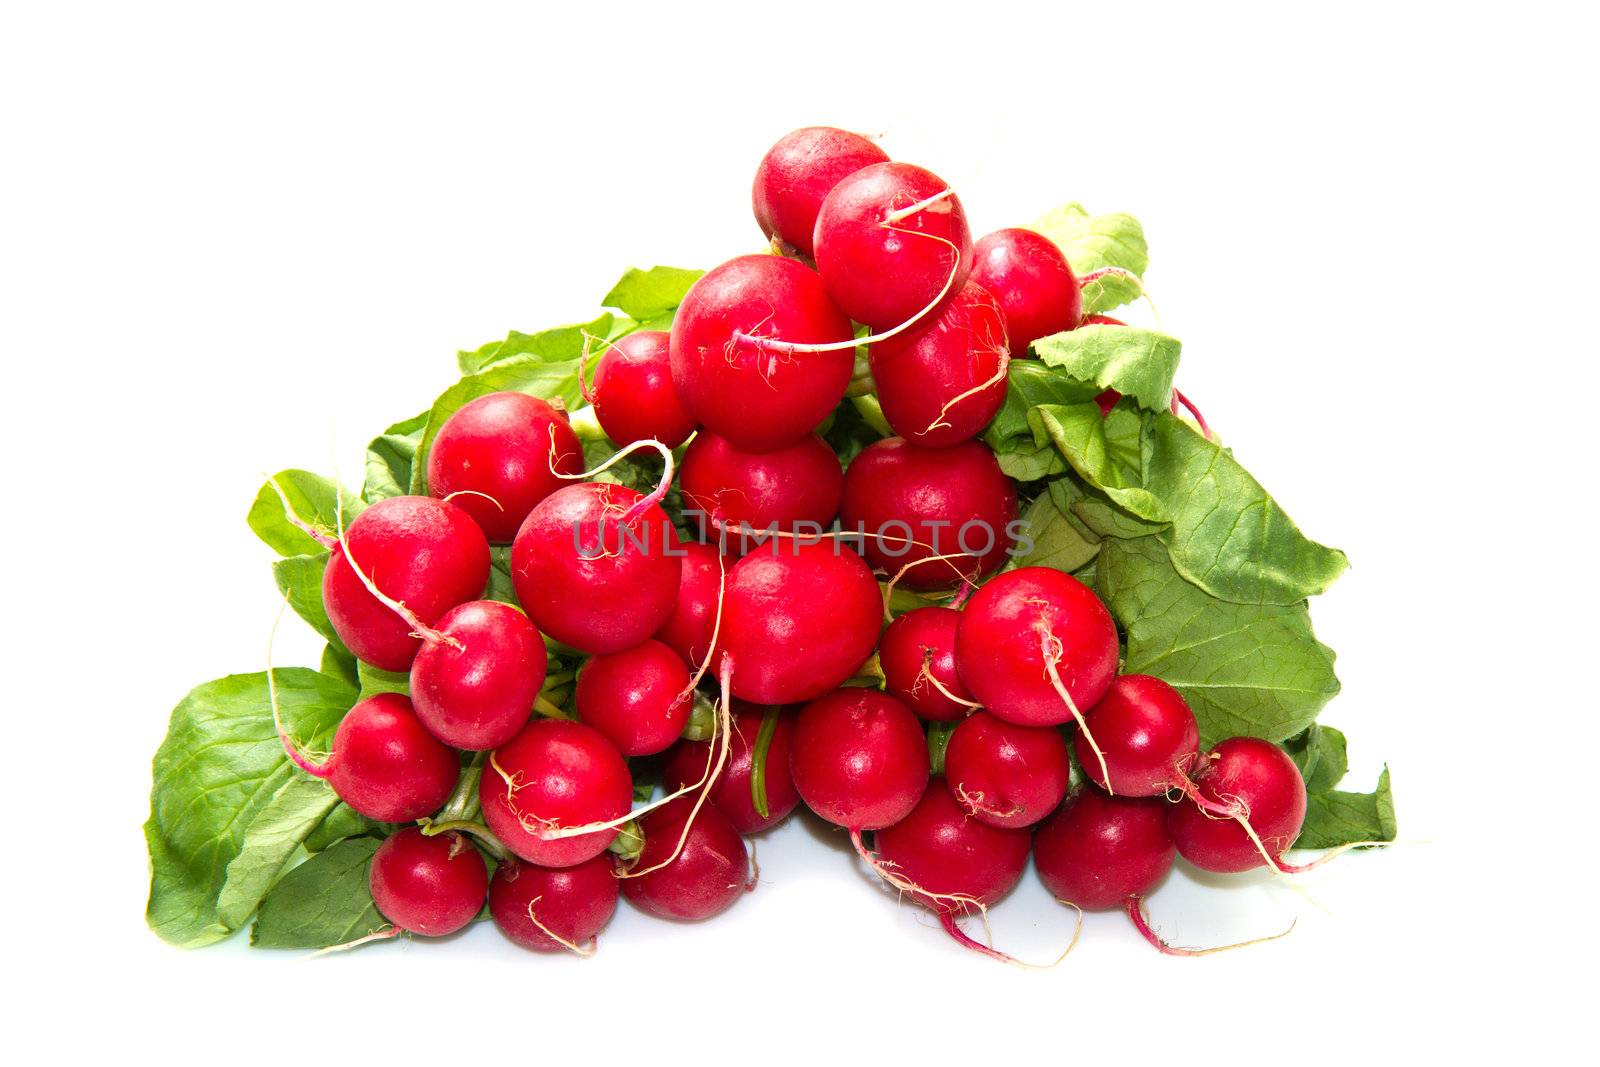 a group of red radishes on white background